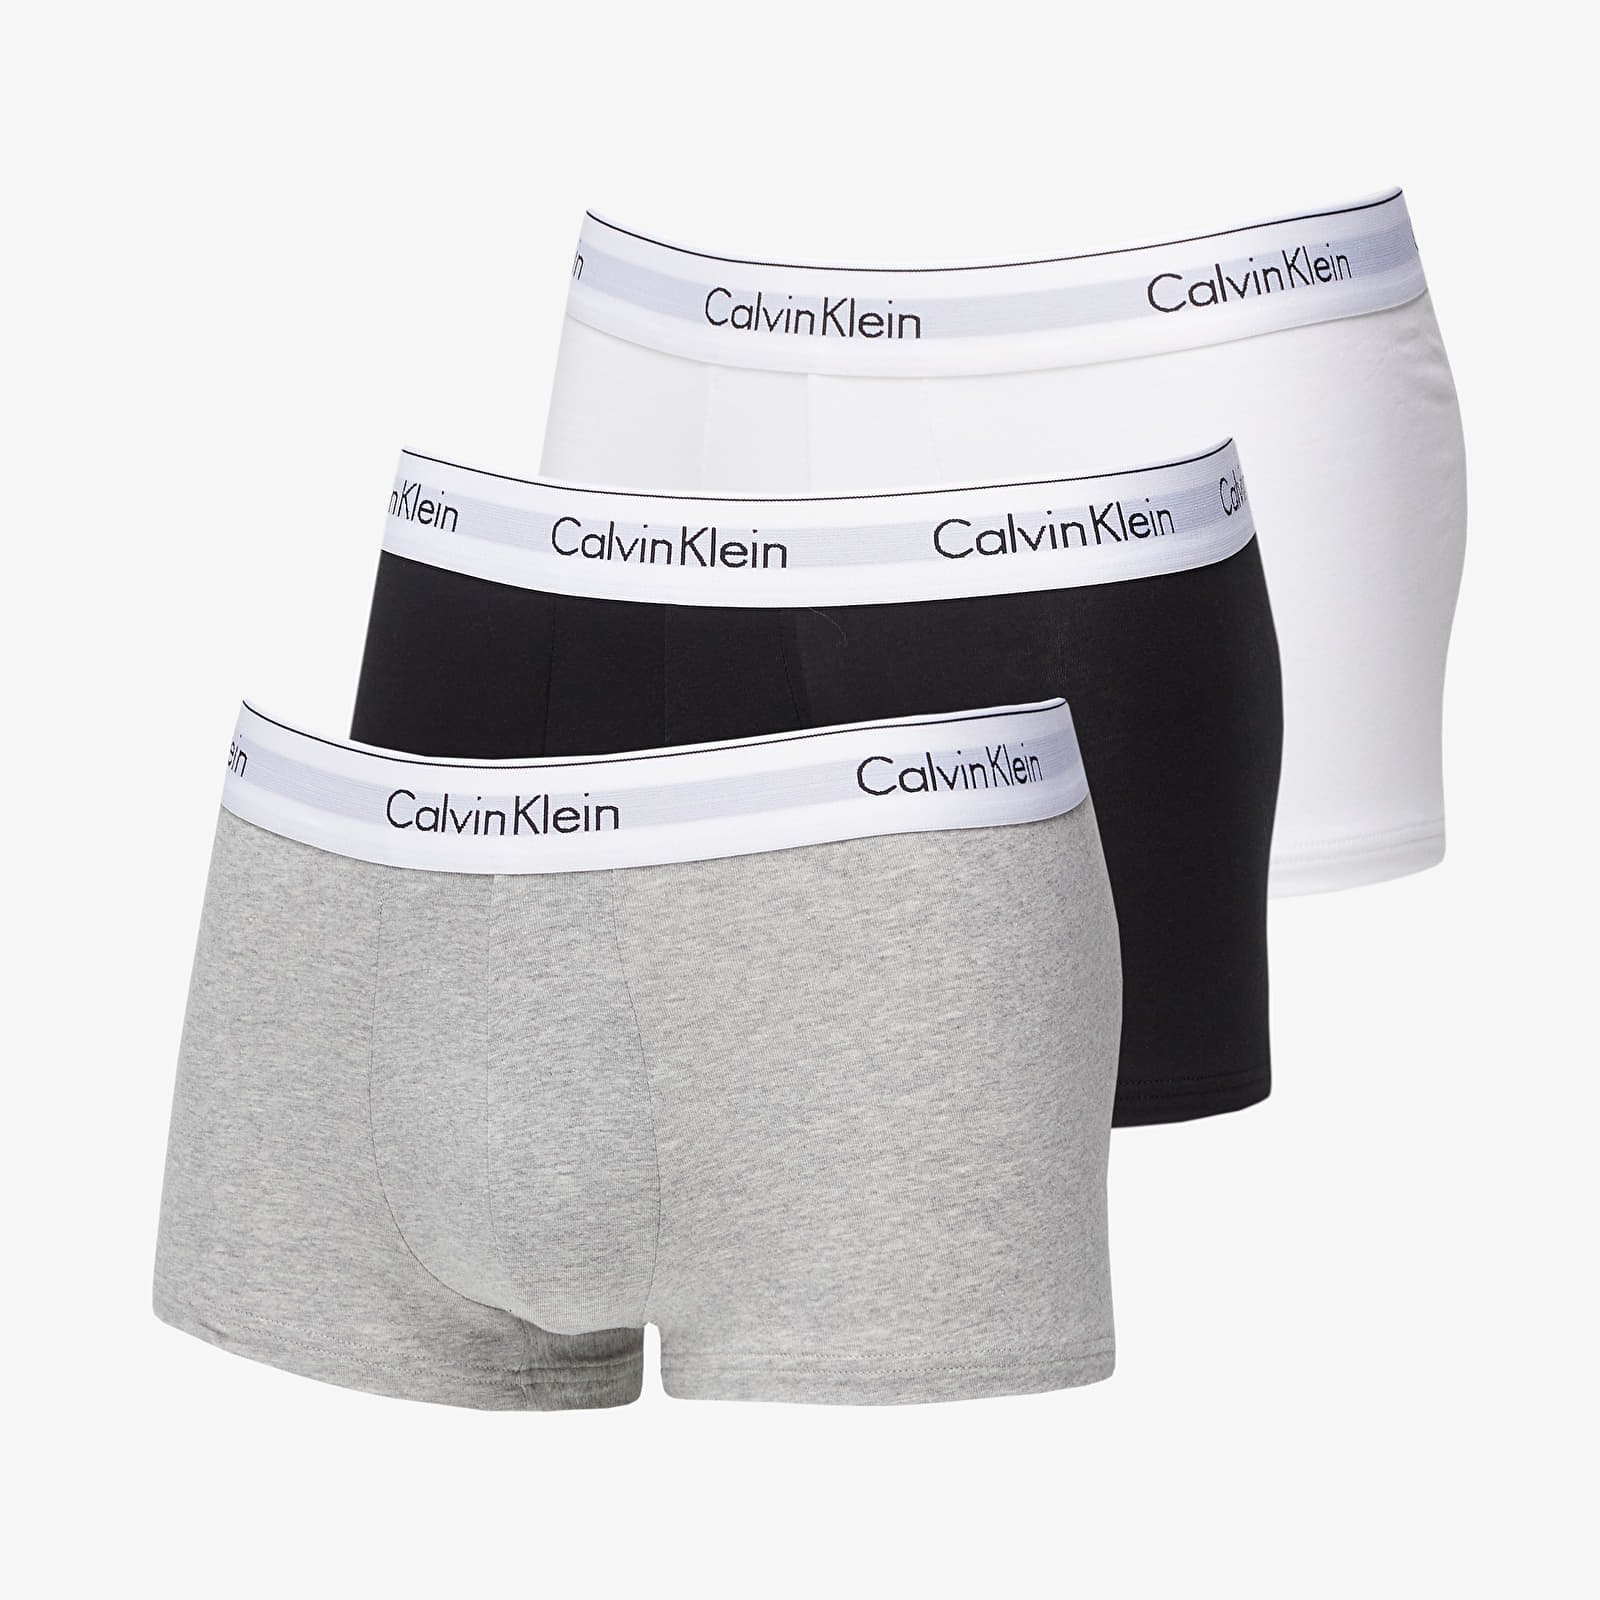 Modern Cotton Stretch Low Rise Trunk 3-Pack "Black/ White/ Grey"